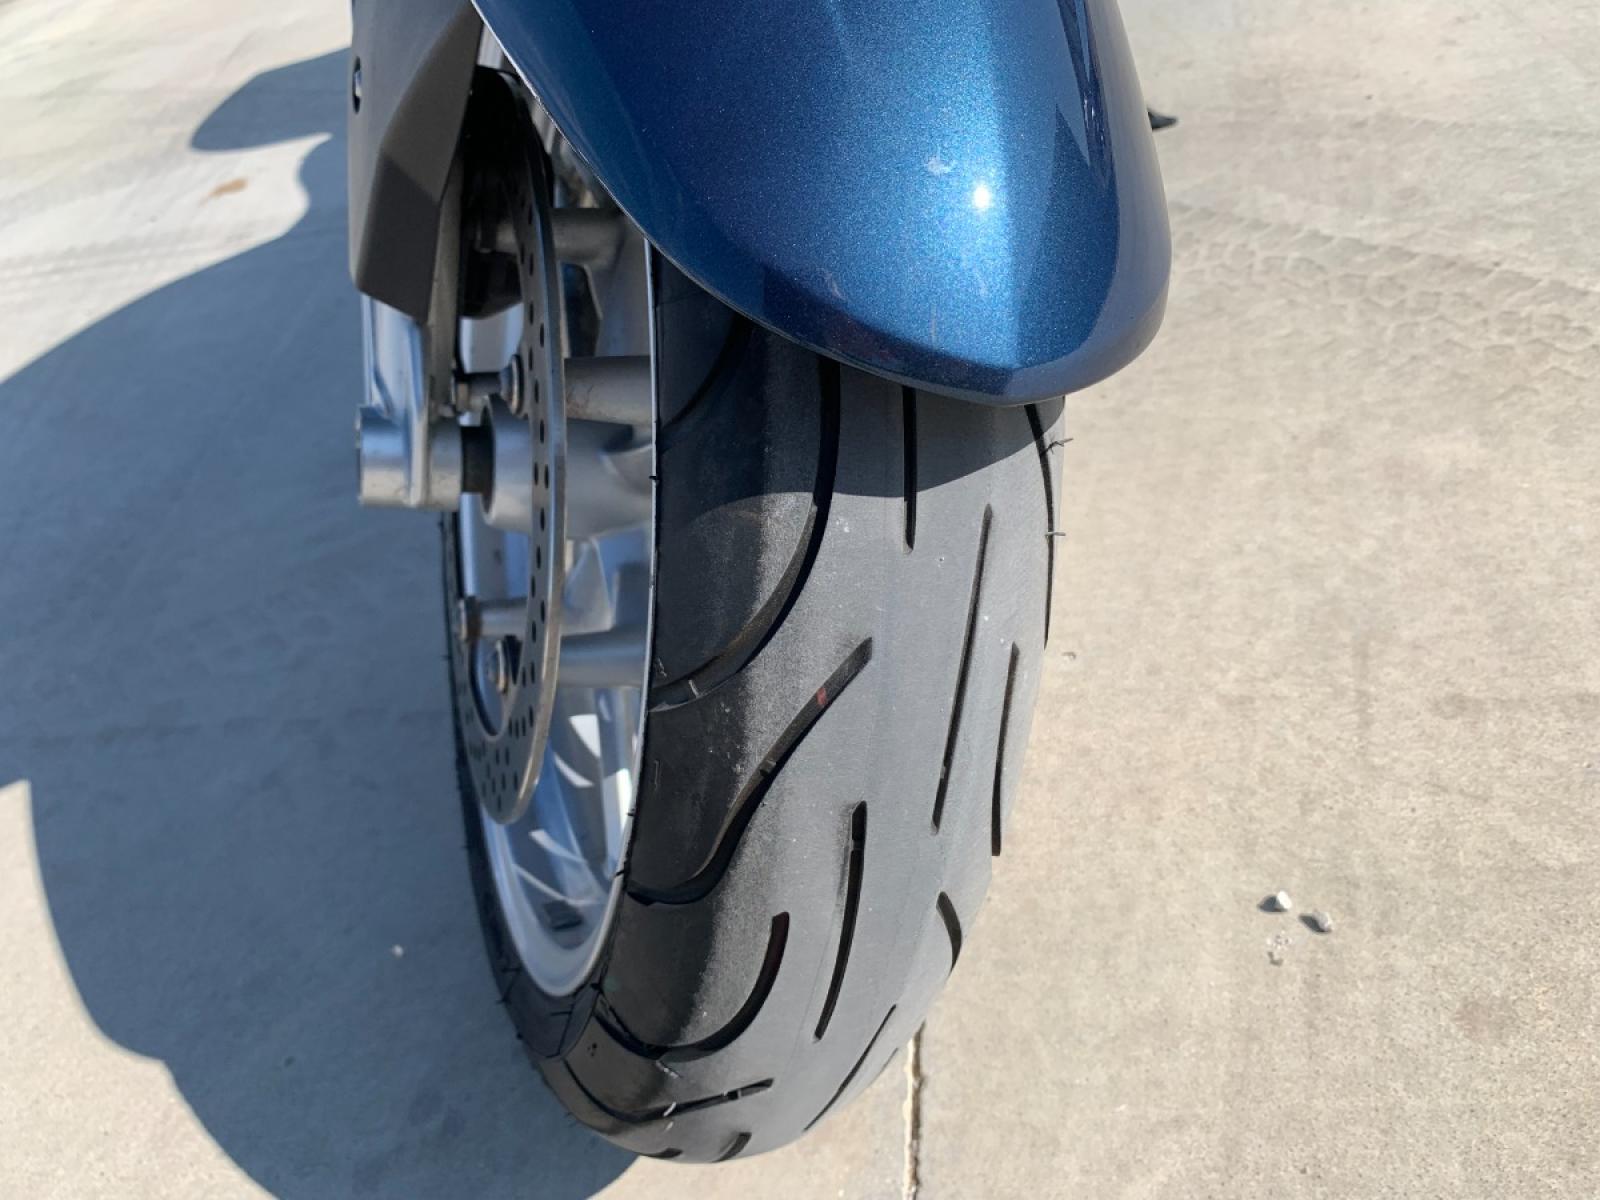 2007 BLUE BMW K1200GT K1200 (WB10597087Z) with an 1157CC engine, located at 17760 HWY 62, MORRIS, 74445, 35.609104, -95.877060 - THE 2007 BMW K1200GT IS A SPORT-TOURING MOTORCYCLE MADE BY BMW. THE SECOND GENERATION K1200GT, INTRODUCED IN 2006, USES ESSENTULY THE SAME INLINE-4 ENGINE AS THE BMW K1200S SPORTSBIKE, WHICH HELD THE WORLD SPEED RECORD IN 2005 FOR ITS CLASS AT 279.33 km/h (173.57 mph), AND THE K1200R. THE NEW MODEL - Photo #19